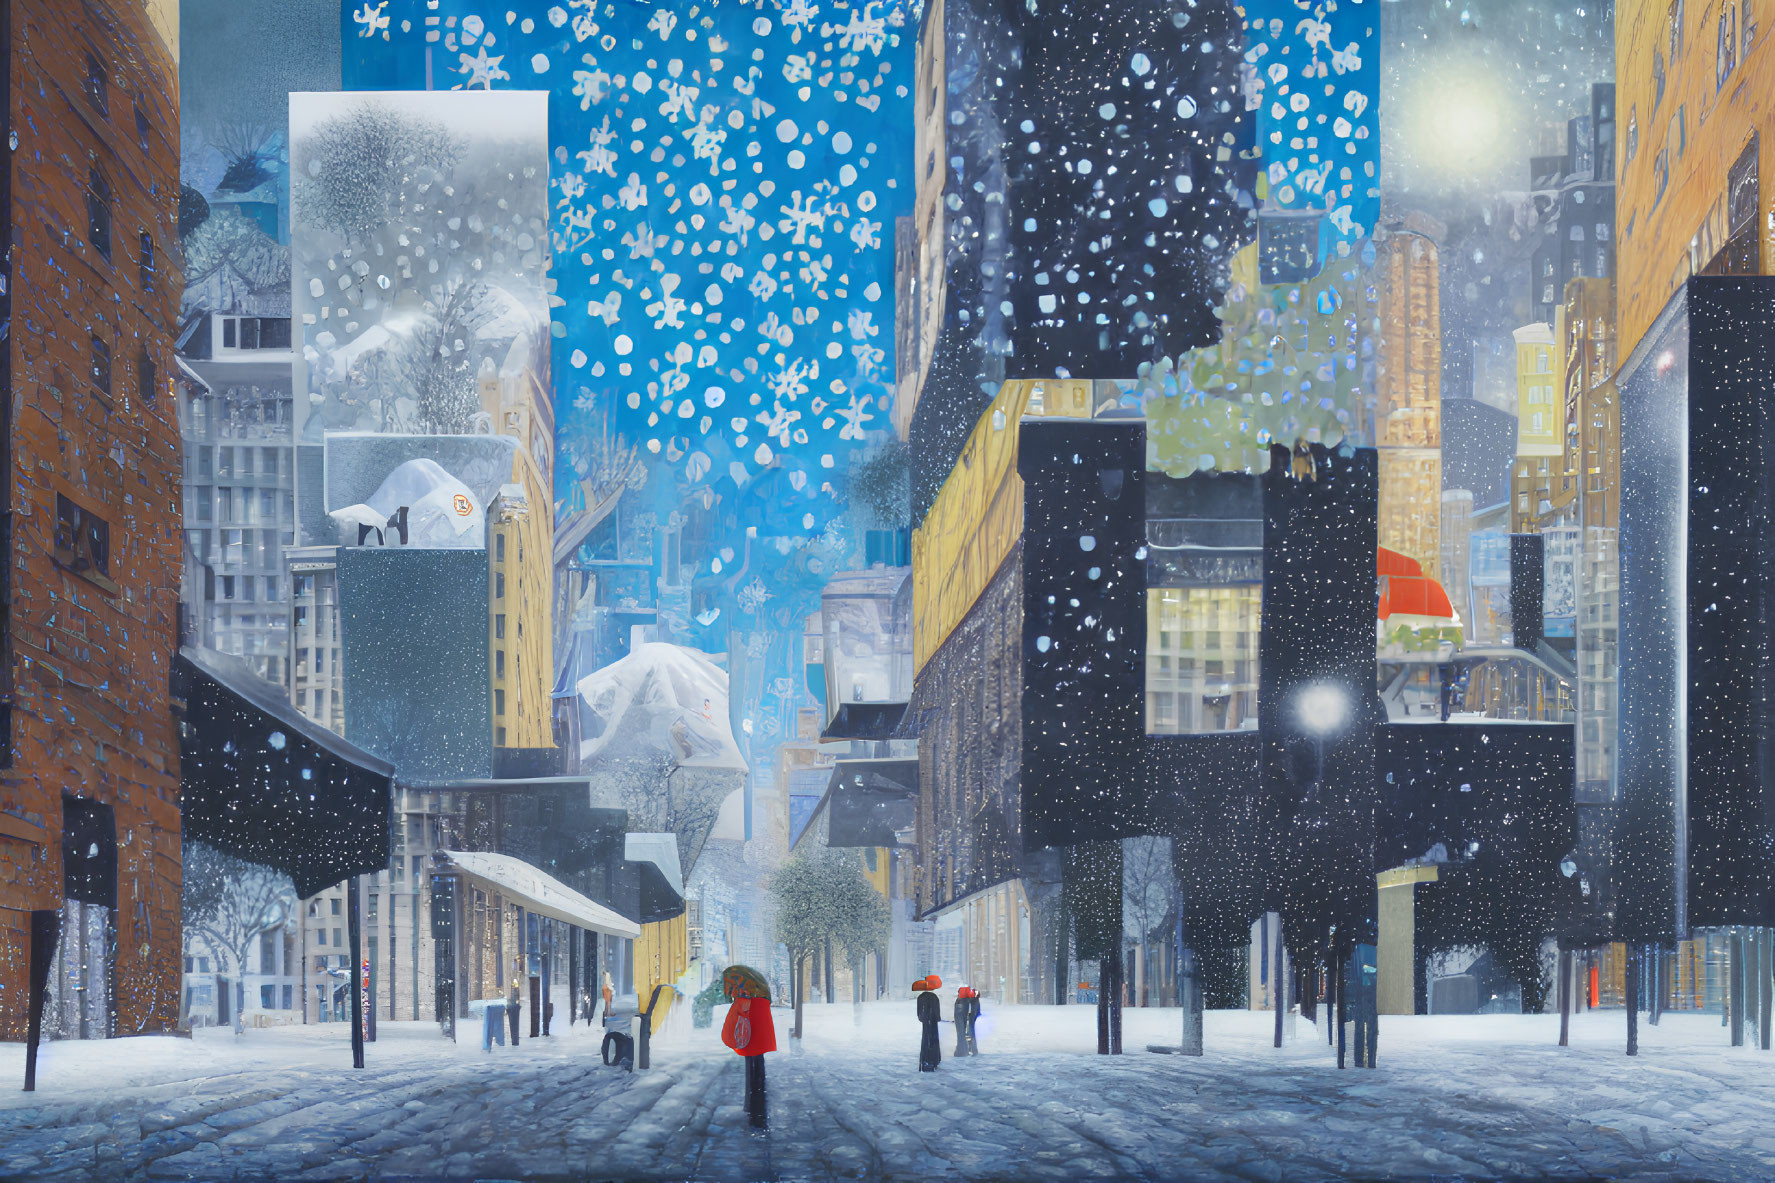 Snowy urban night scene with pedestrians and city lights